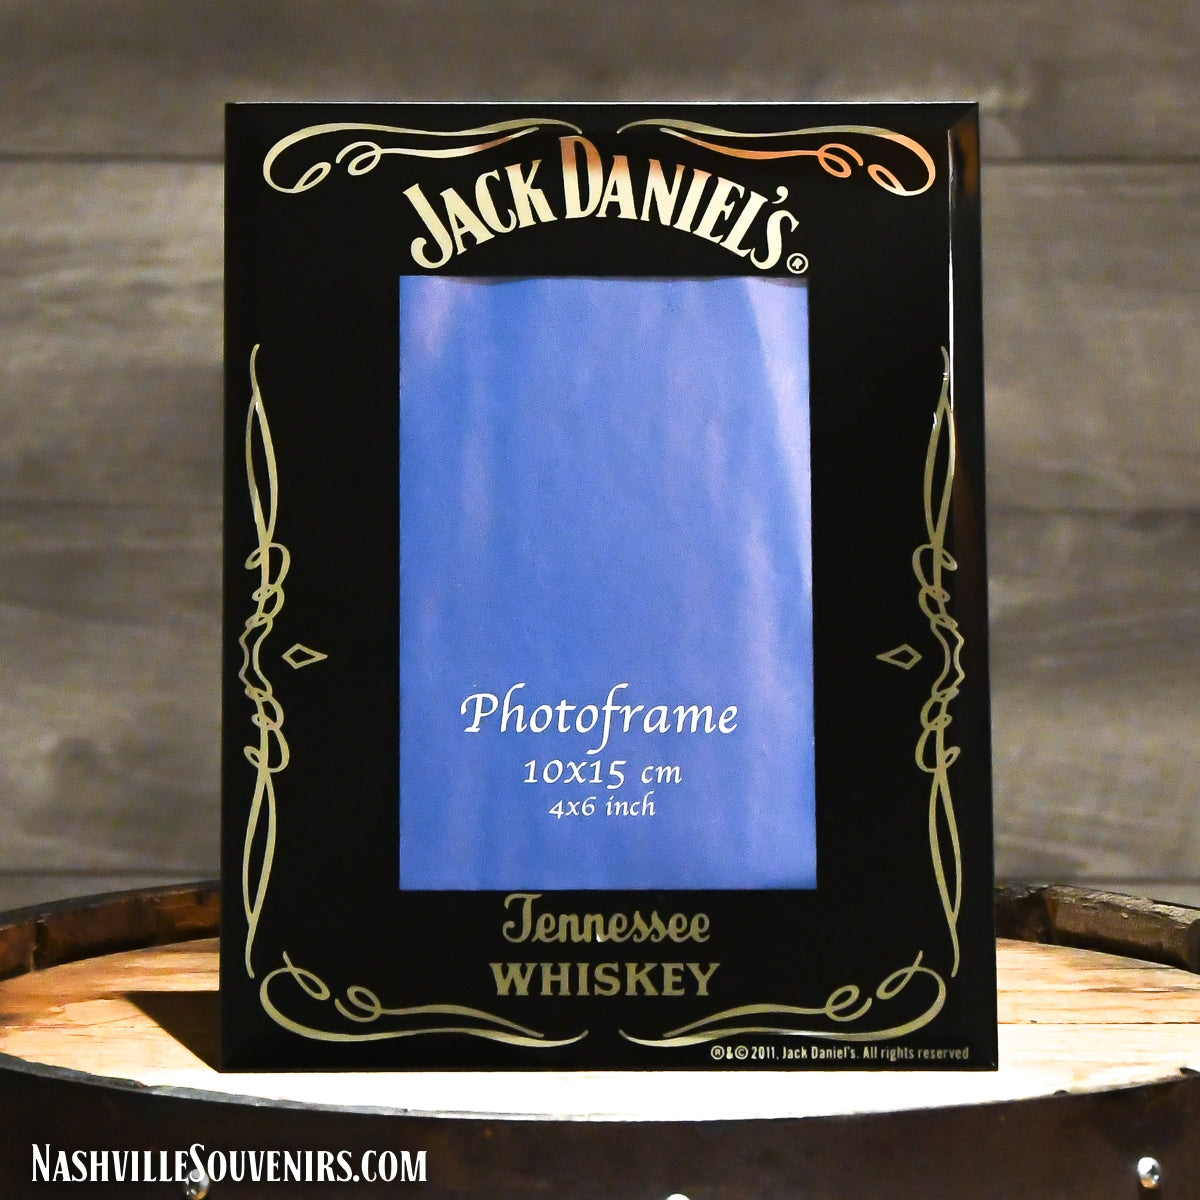 Officially licensed Jack Daniels Mirror Photo Frame. Get yours today with FREE SHIPPING on all US orders over $75!